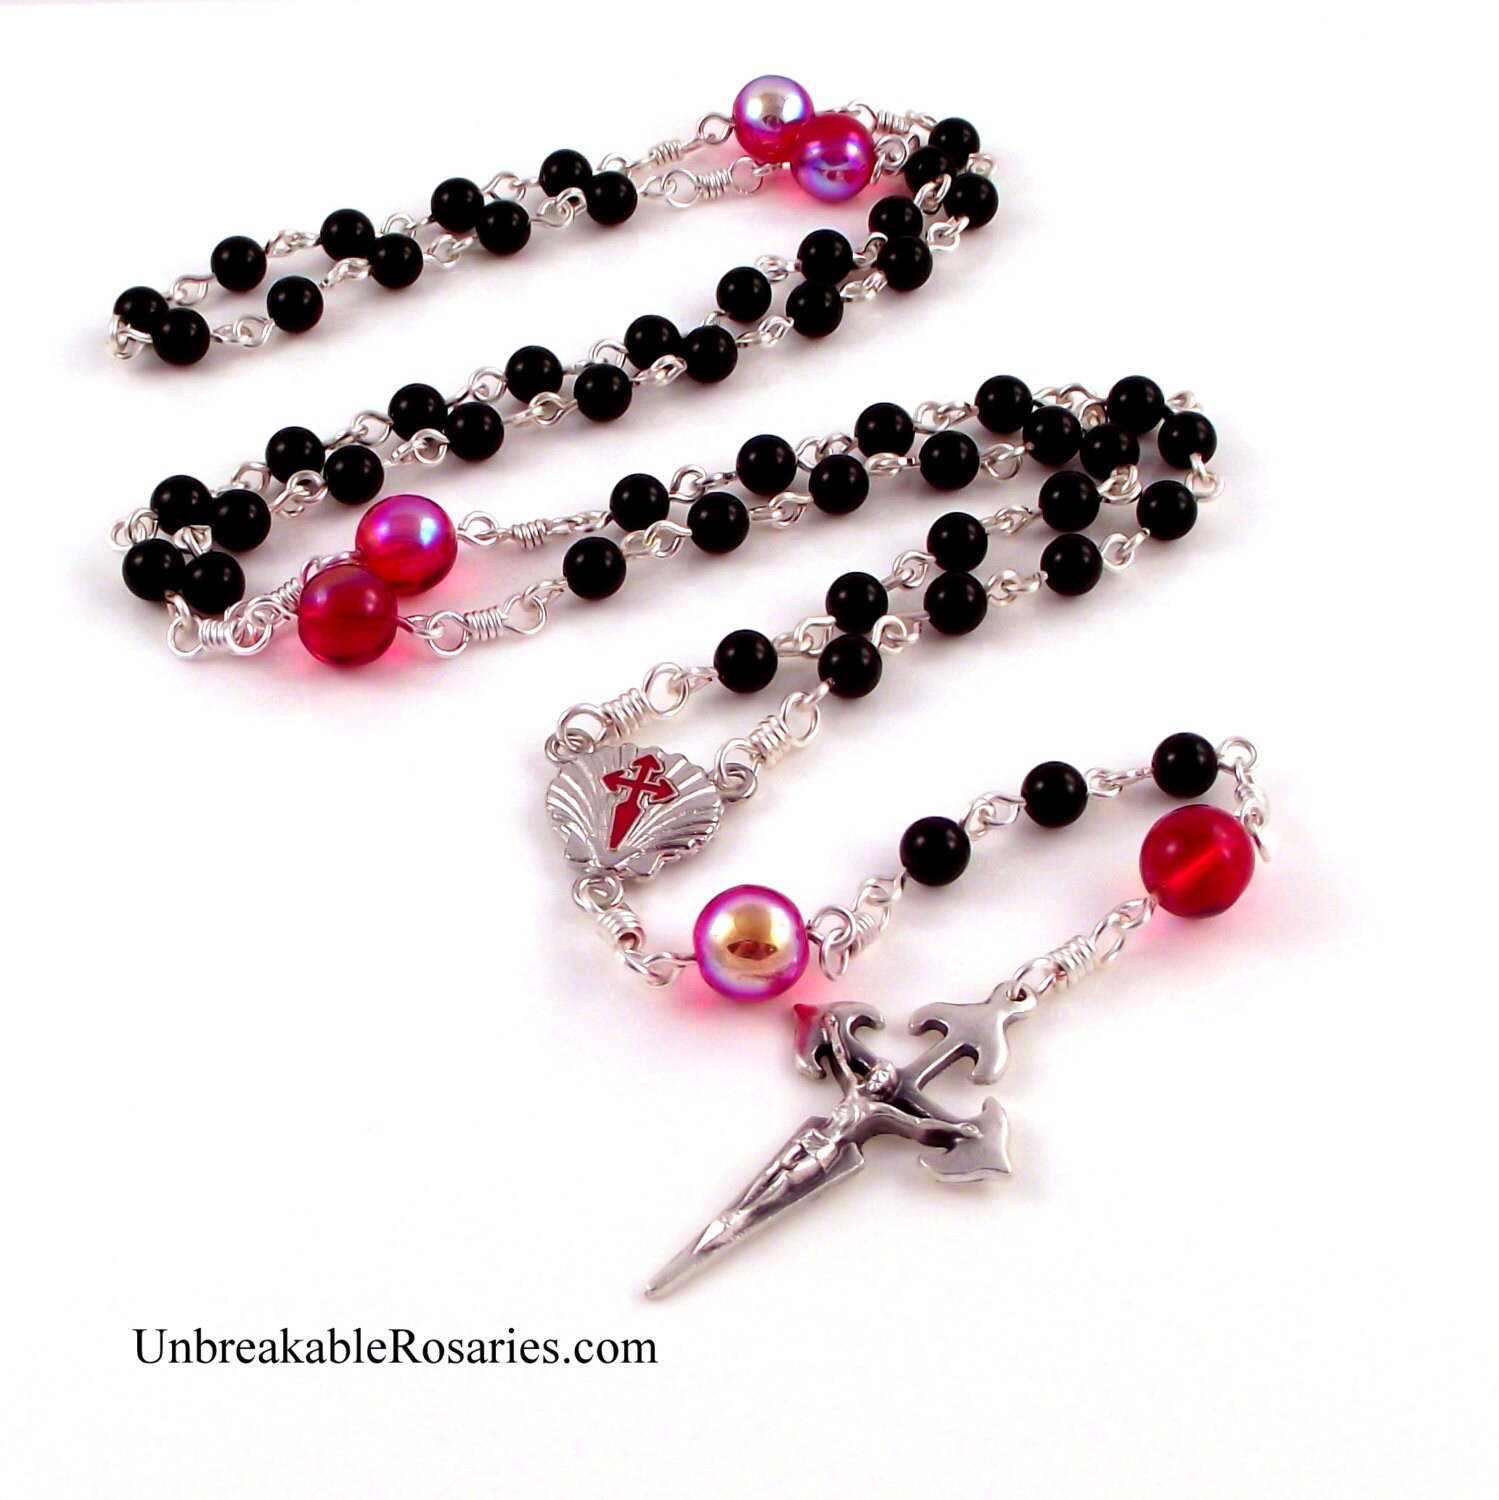 St James Camino de Santiago Rosary Beads in Black Onyx and Red